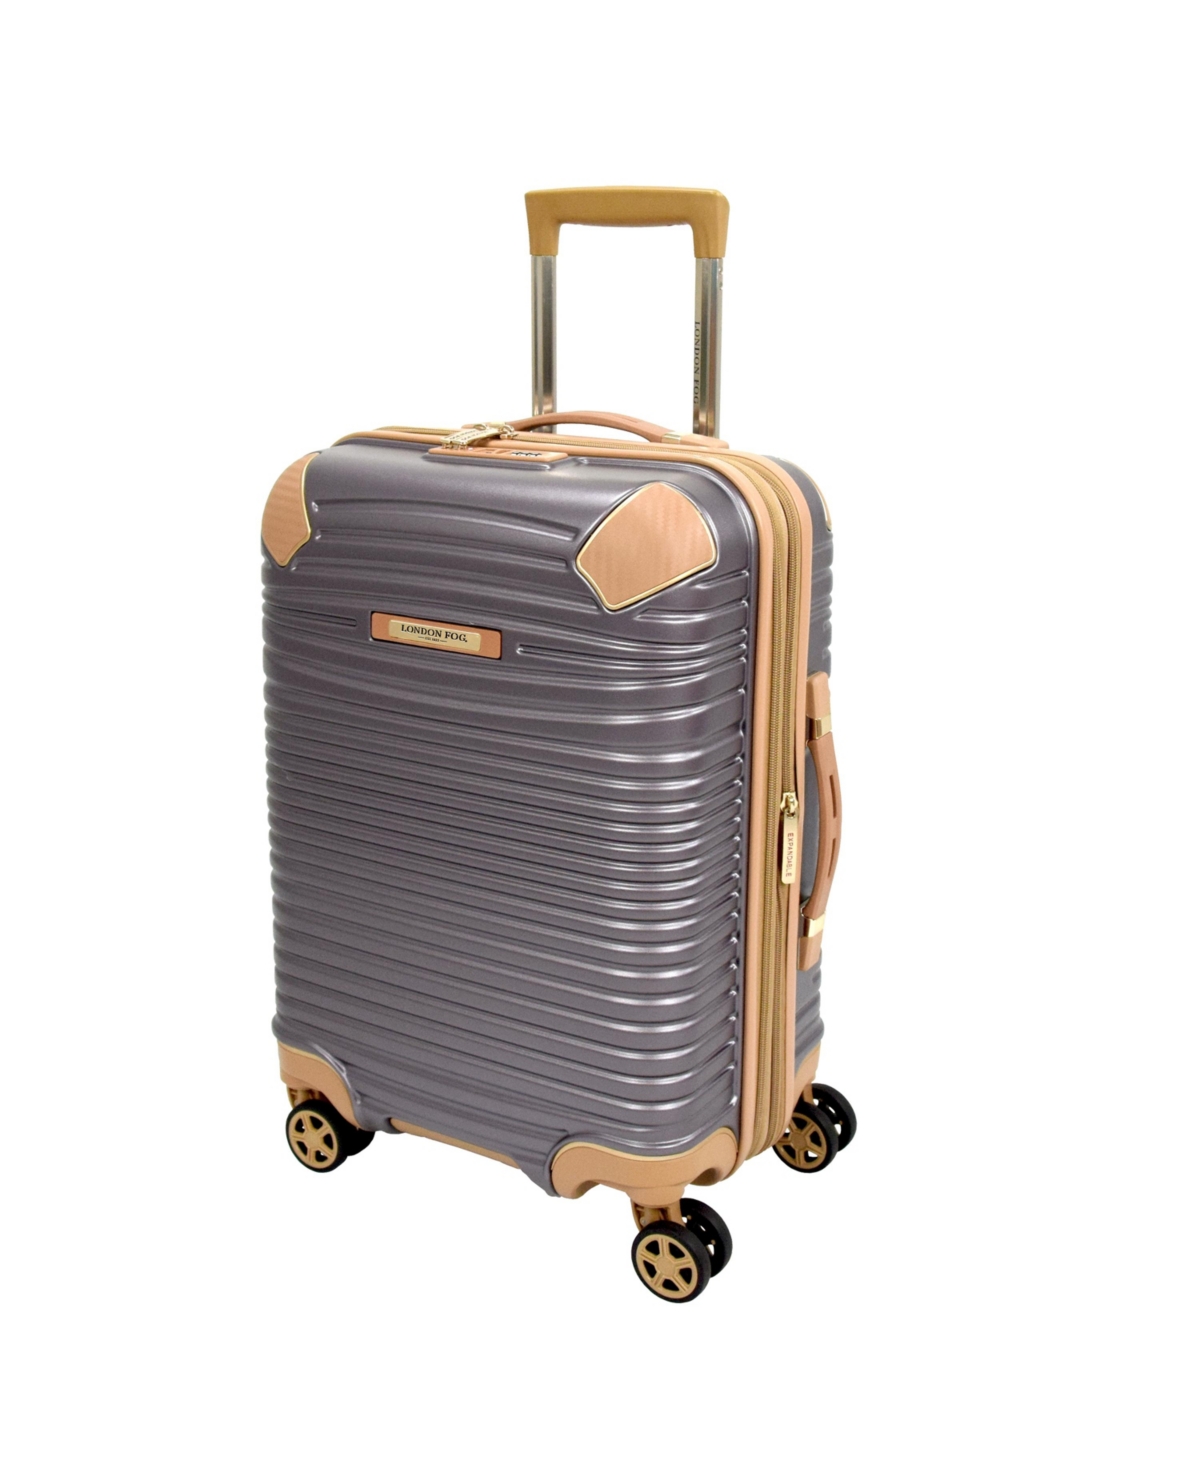 Closeout! London Fog Chelsea 20" Hardside Carry-On Spinner Suitcase - Champagne